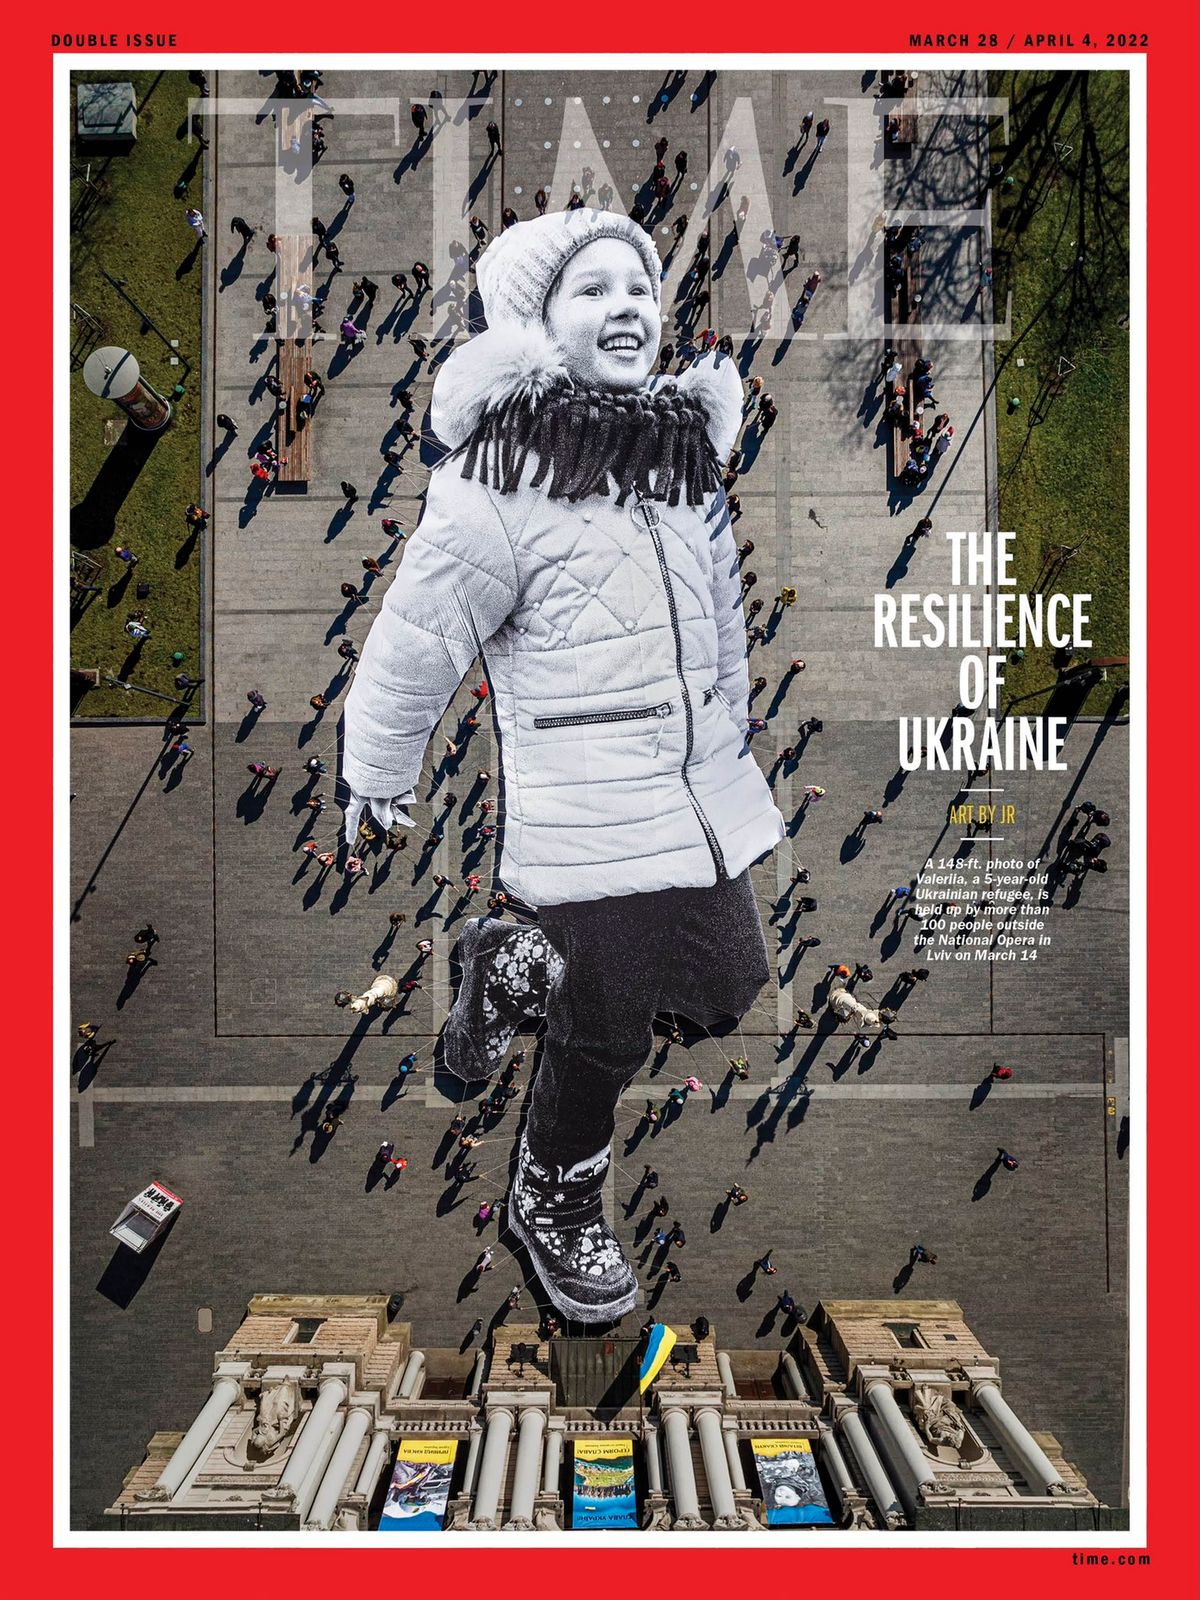 More than 100 people helped unfurl JR's giant photograph of a young Ukrainian refugee in the city of Lviv Courtesy of the artist and Time magazine